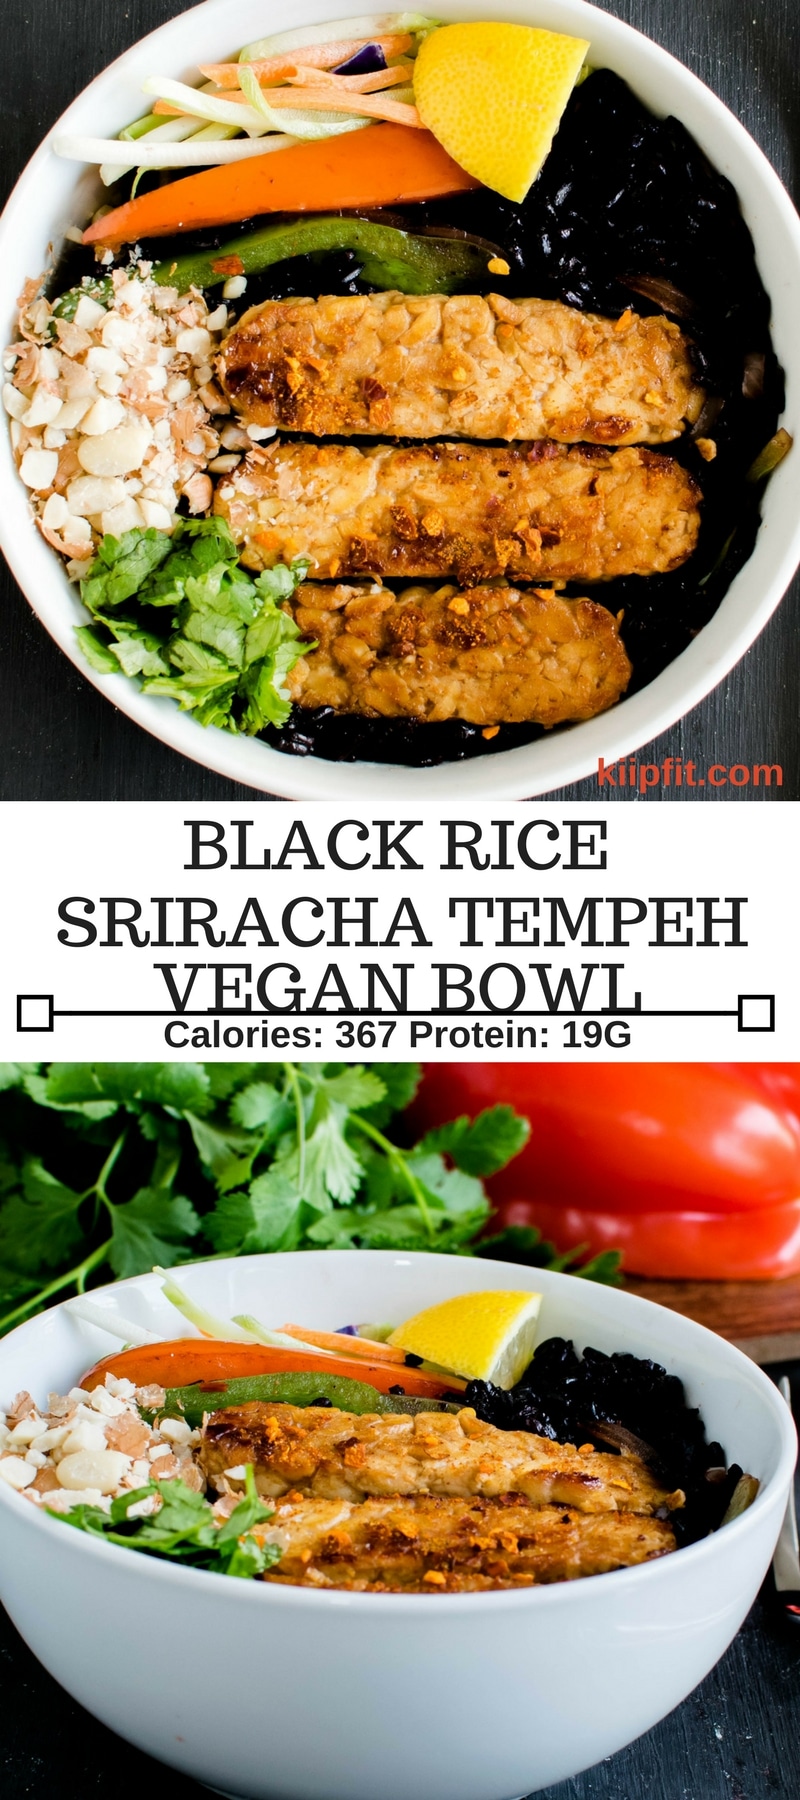 Black Rice Sriracha Tempeh Bowl is a vegan and gluten free meal for any week nights. It’s a wholesome delectable meal loaded with antioxidant and protein. It is high in fiber and is a medley of Asian flavors [ vegan + GF ] kiipfit.com